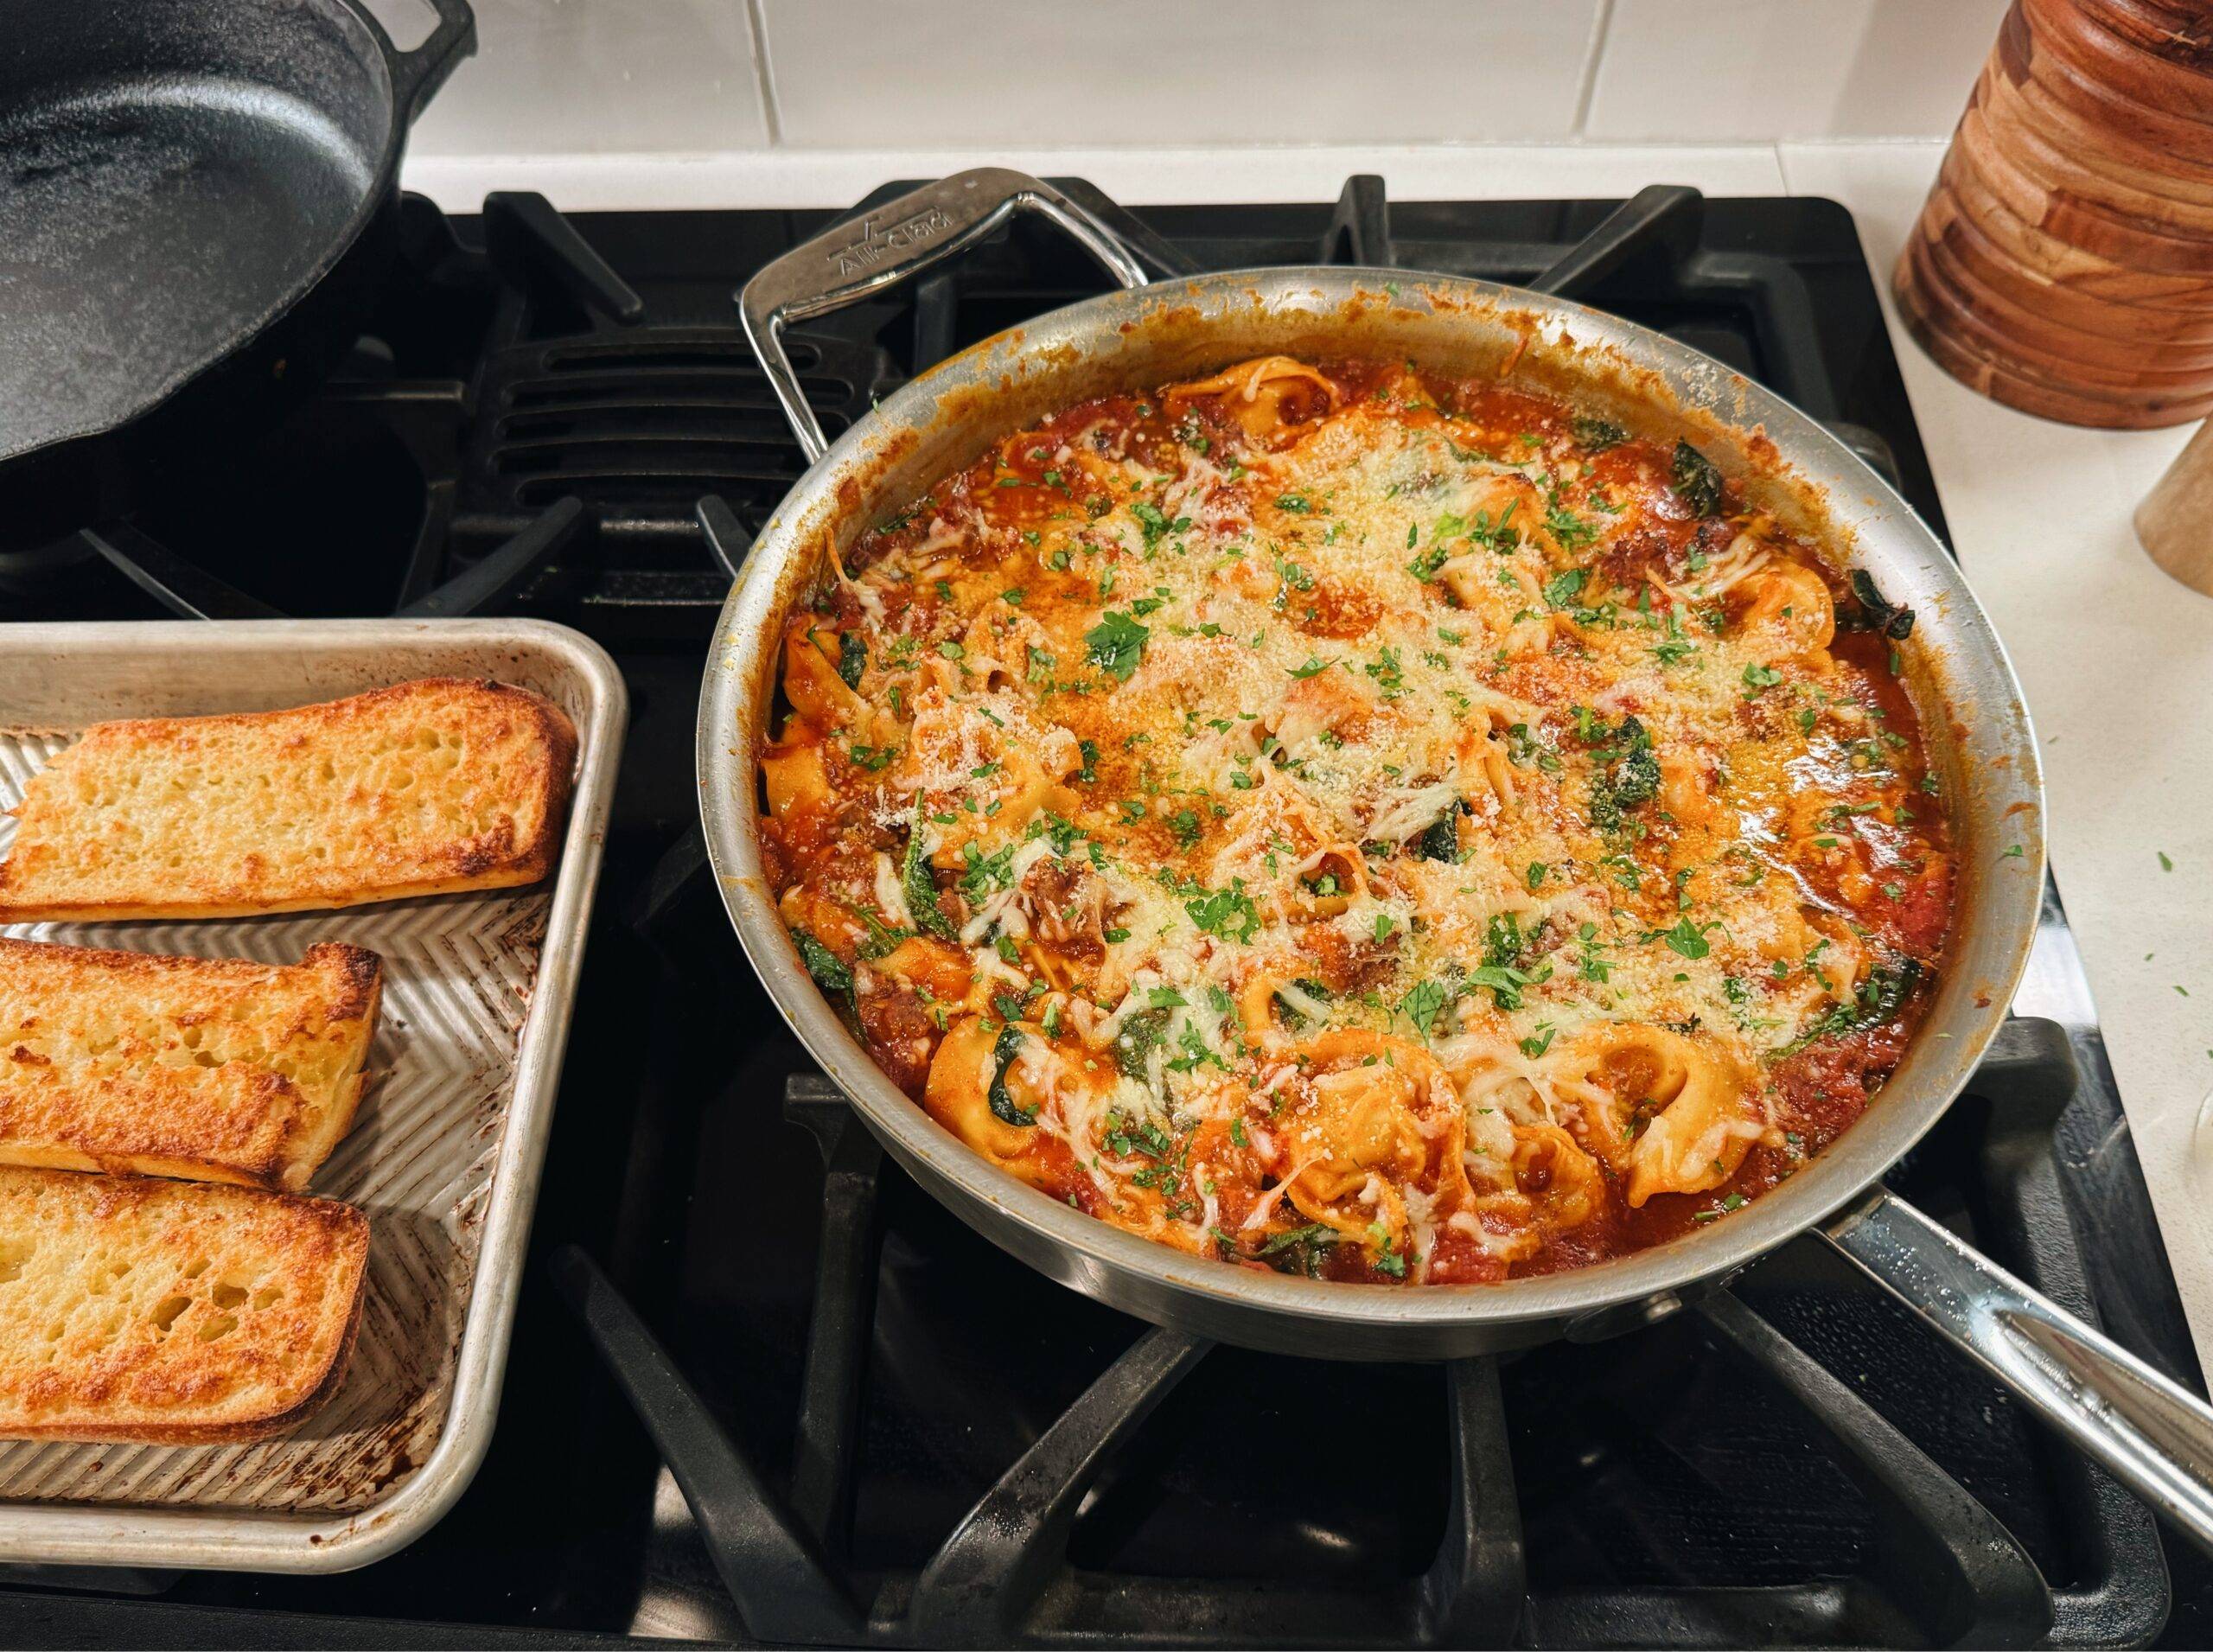 Serving baked tortellini with garlic bread